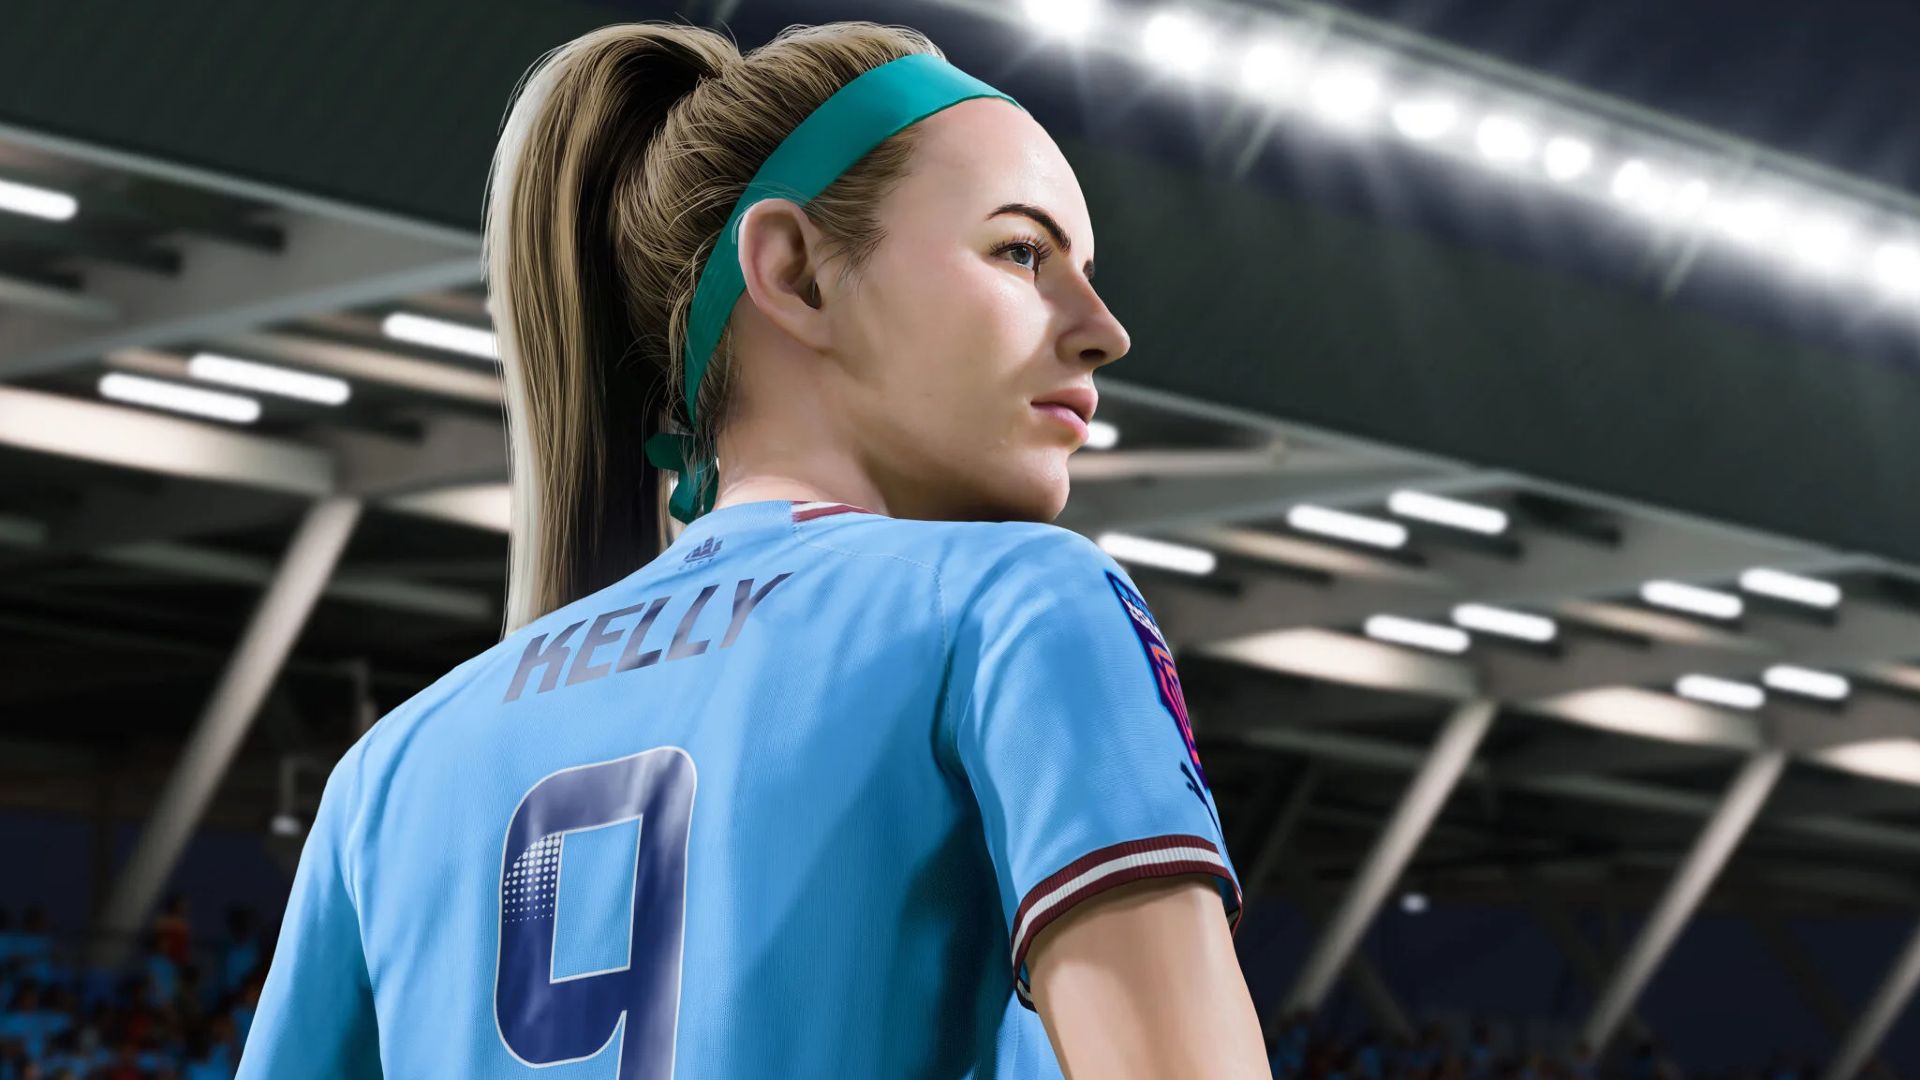 FIFA 23 Companion App Release Date, Start Time, and Login Details